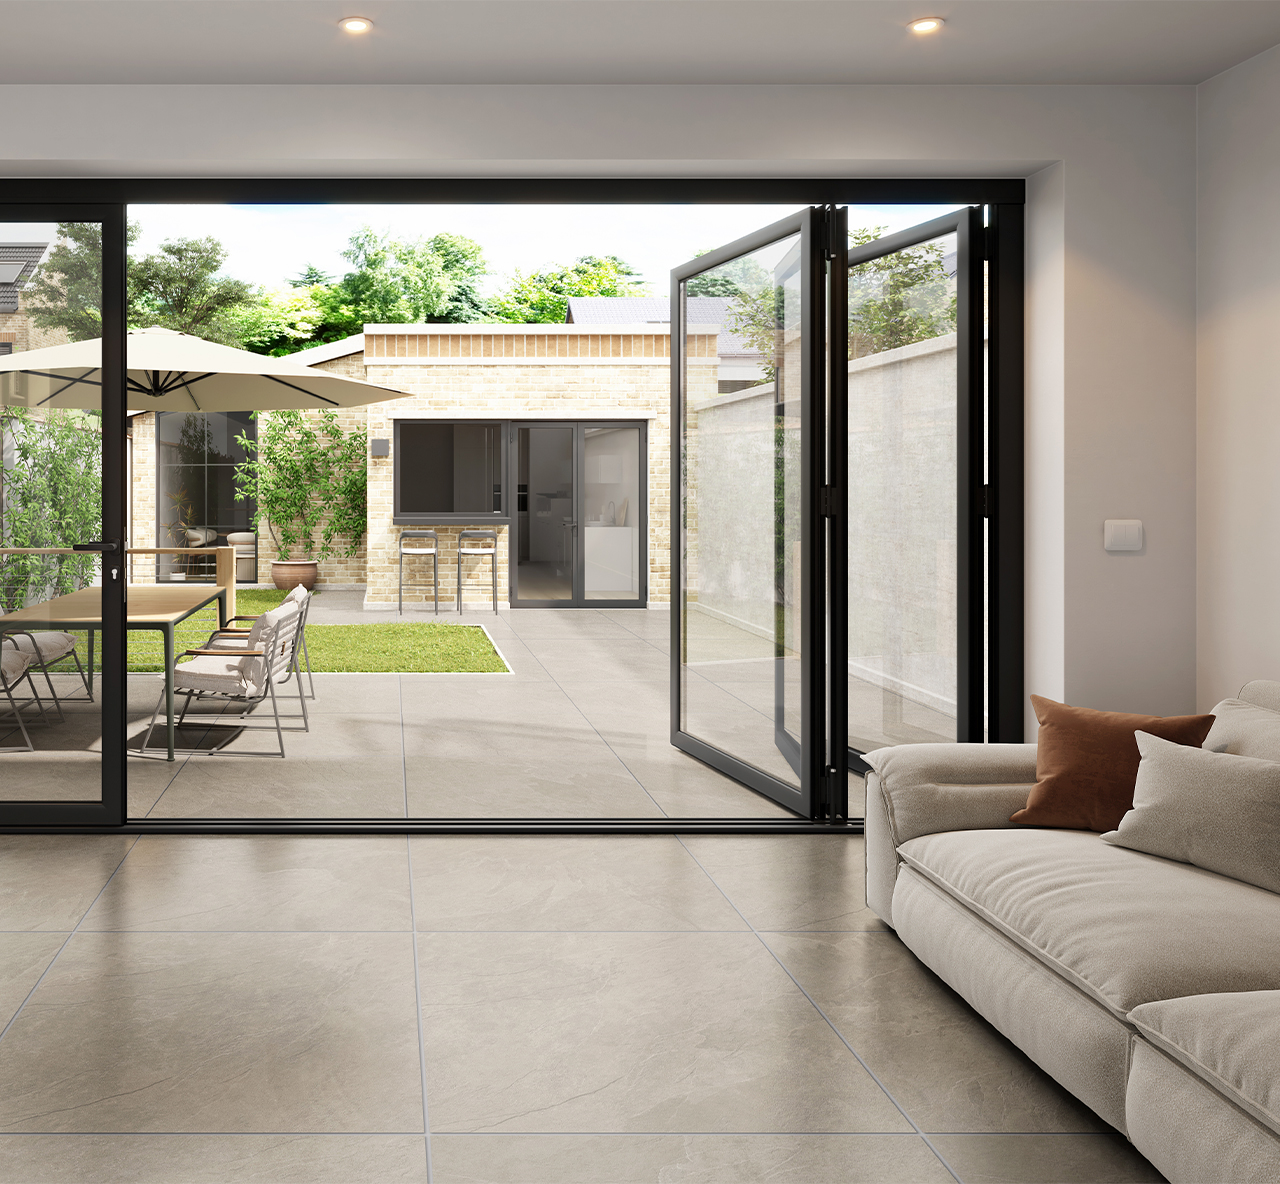 Valverdi Fossil Ash beige stone effect outdoor porcelain tiles used outdoors on a patio with matching indoor tiles